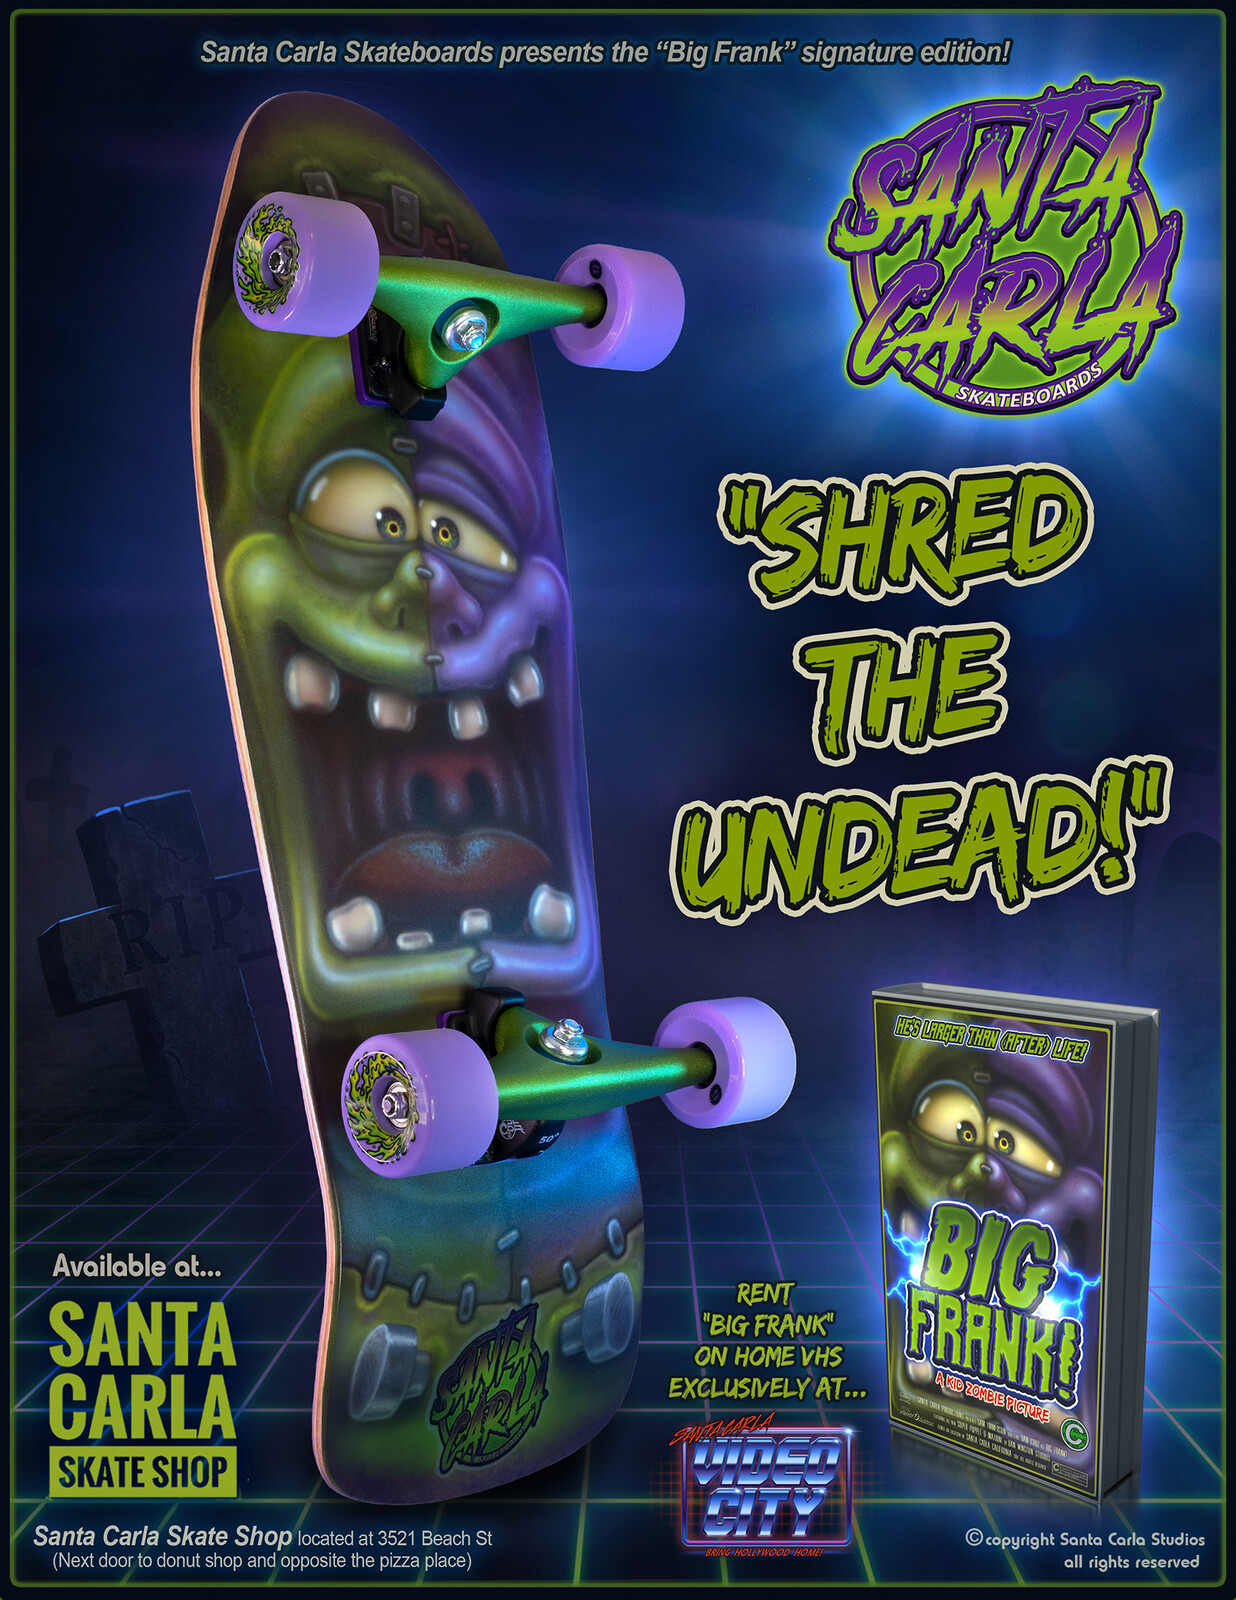 This is my first Santa Carla Skate Shop and Video City cross-over! 